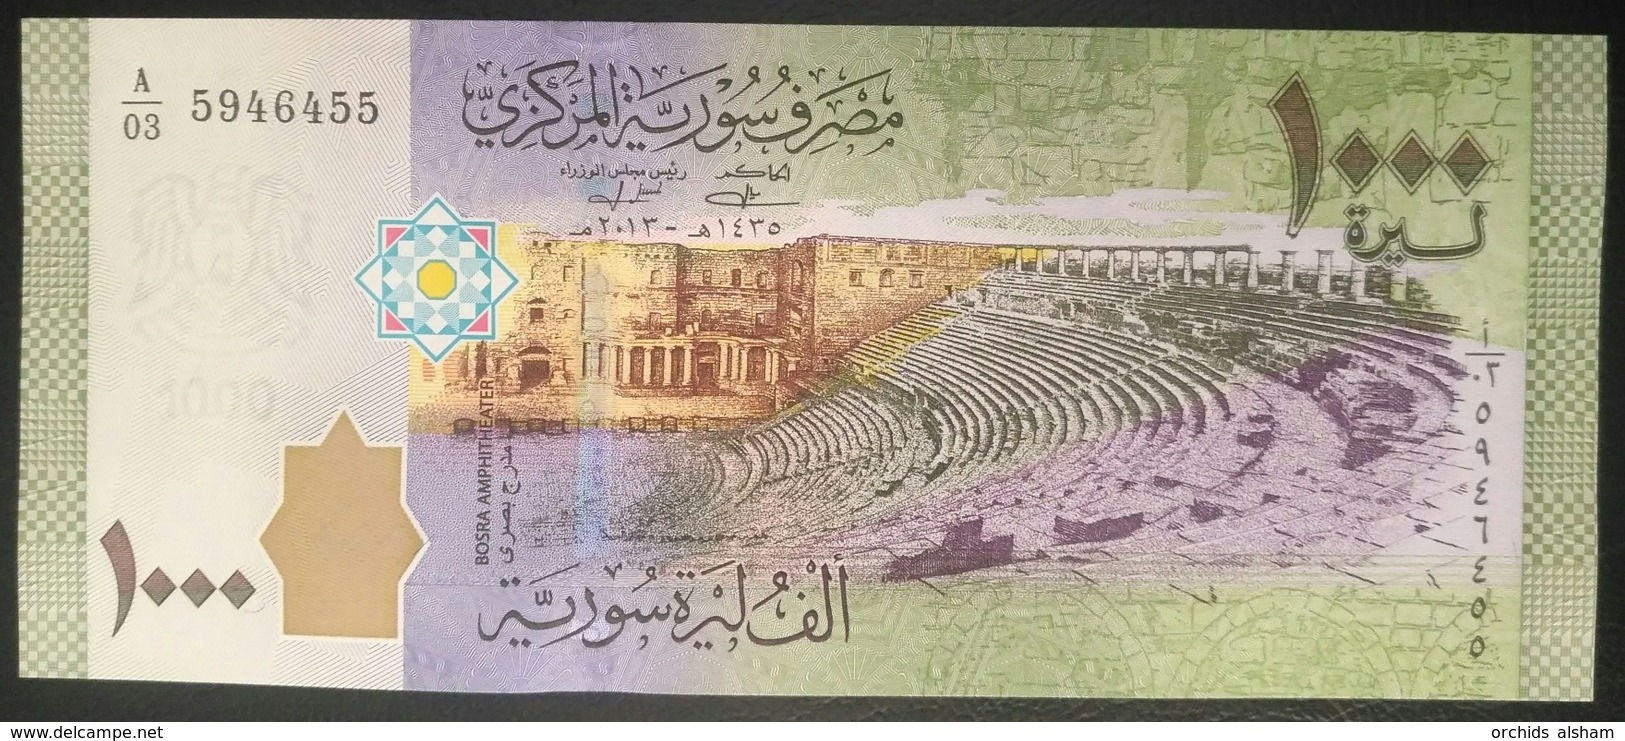 Syria 2013 1000 Pounds, Liras . P-116, UNC - Old Musical Instruments - Syrie